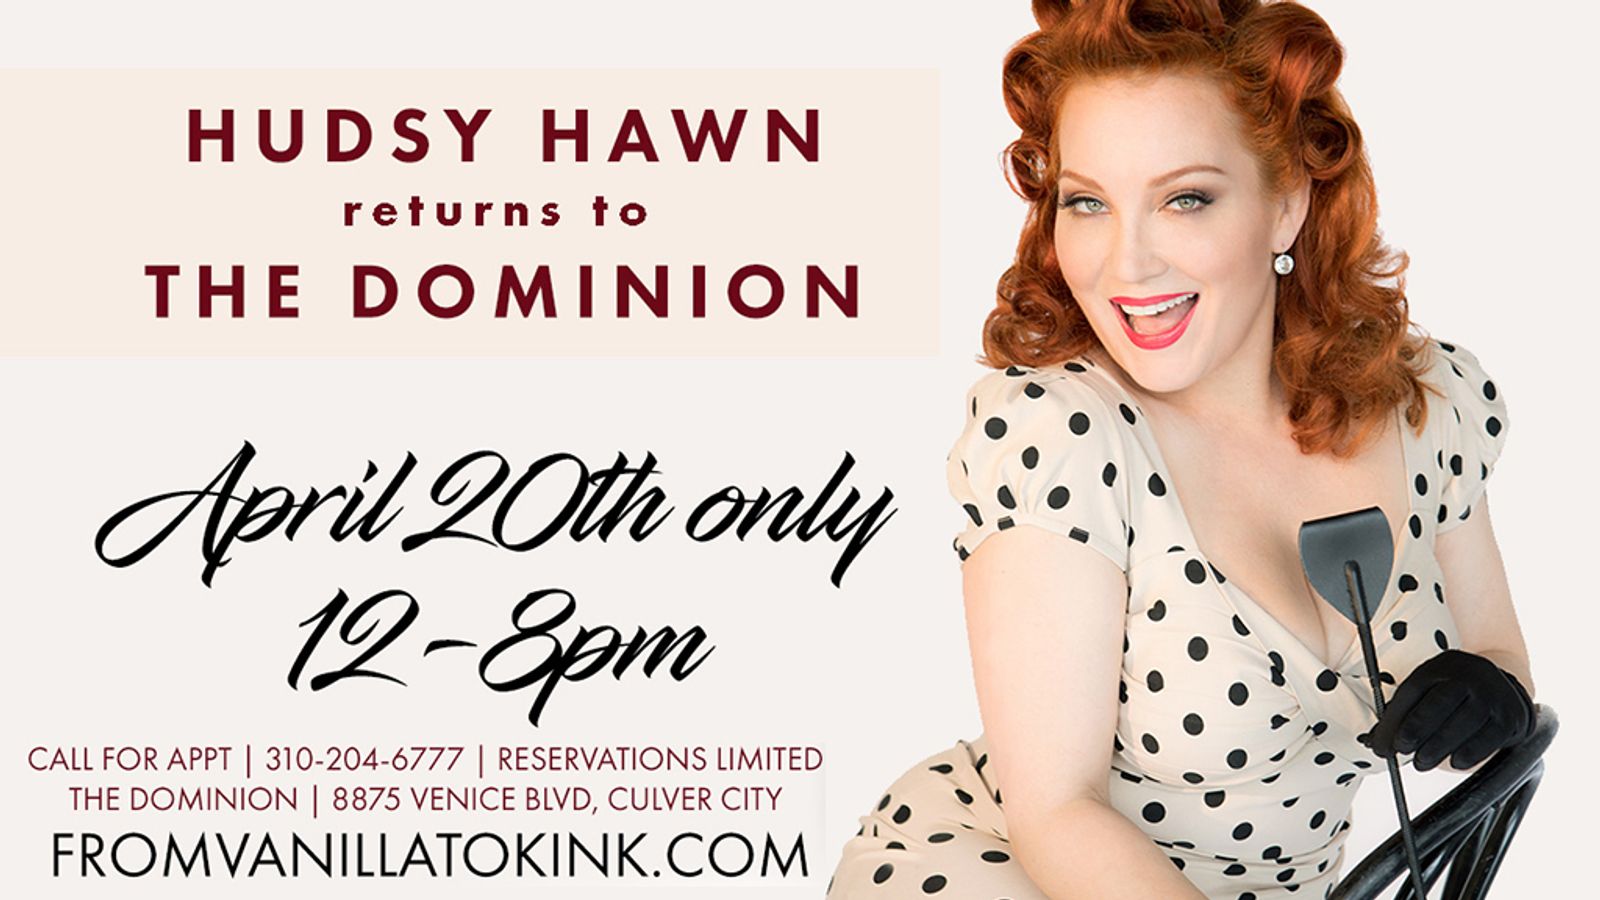 Hudsy Hawn To Be Special Guest Mistress at The Dominion Today